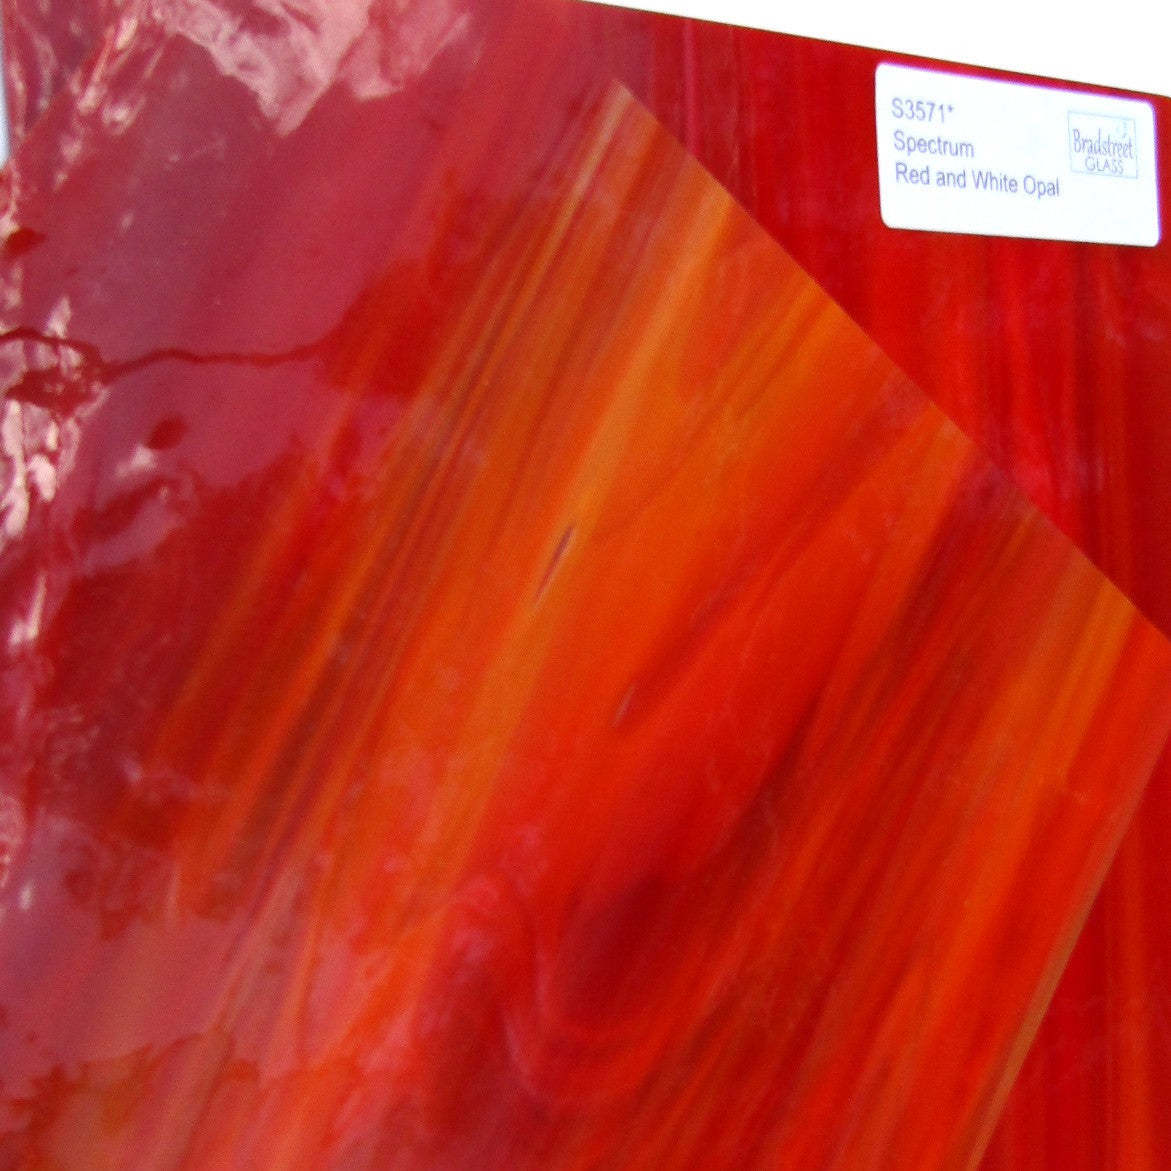 Spectrum Red and White Opal Stained Glass Sheet S3571